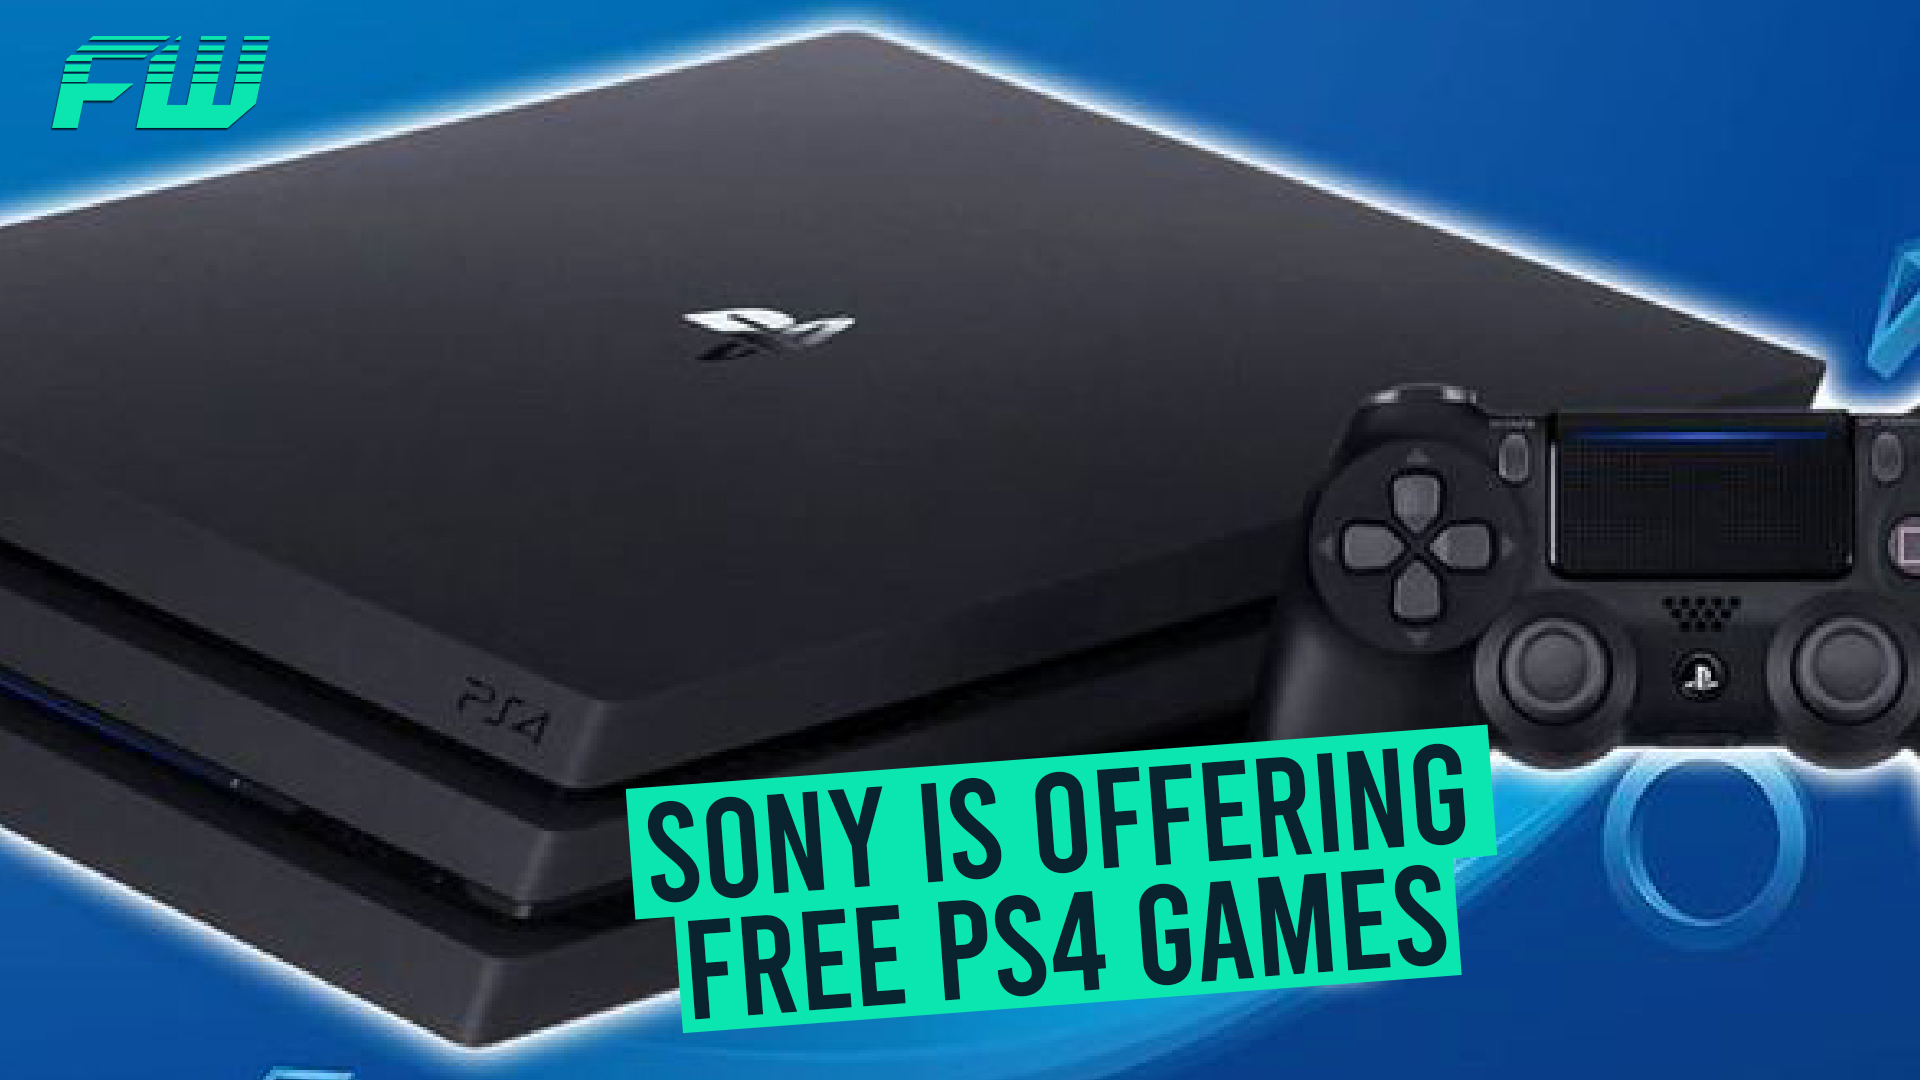 Sony is offering free PS4 games